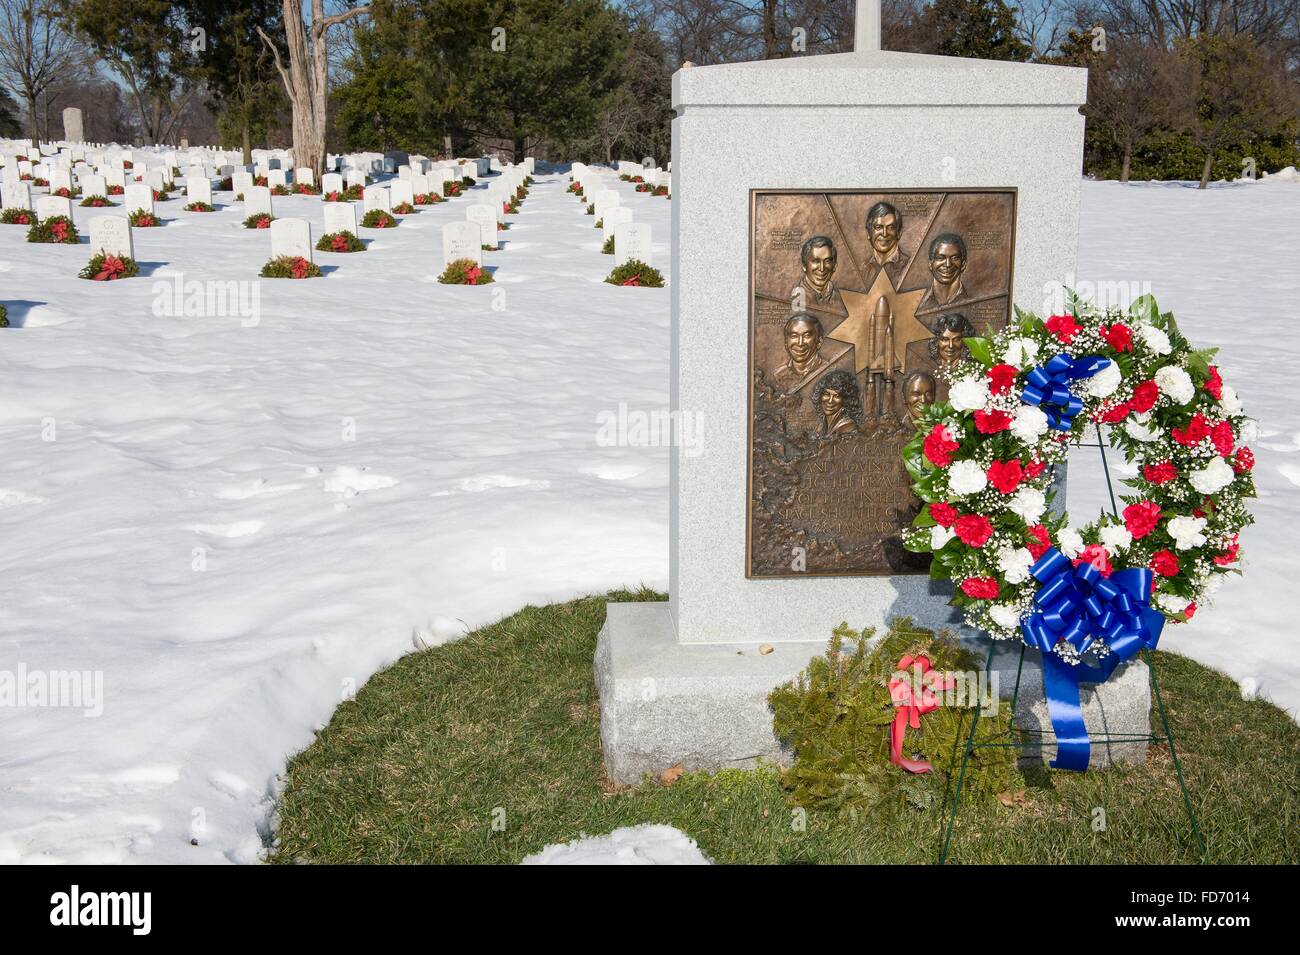 Arlington, Virginia, USA. 28th January, 2016. The Space Shuttle Challenger Memorial with a wreath as part of NASA's Day of Remembrance on the 30th anniversary of the Challenger explosion at Arlington National Cemetery January 28, 2016 in Arlington, Virginia. The wreaths were placed in memory of those men and women who lost their lives in the quest for space exploration. Stock Photo